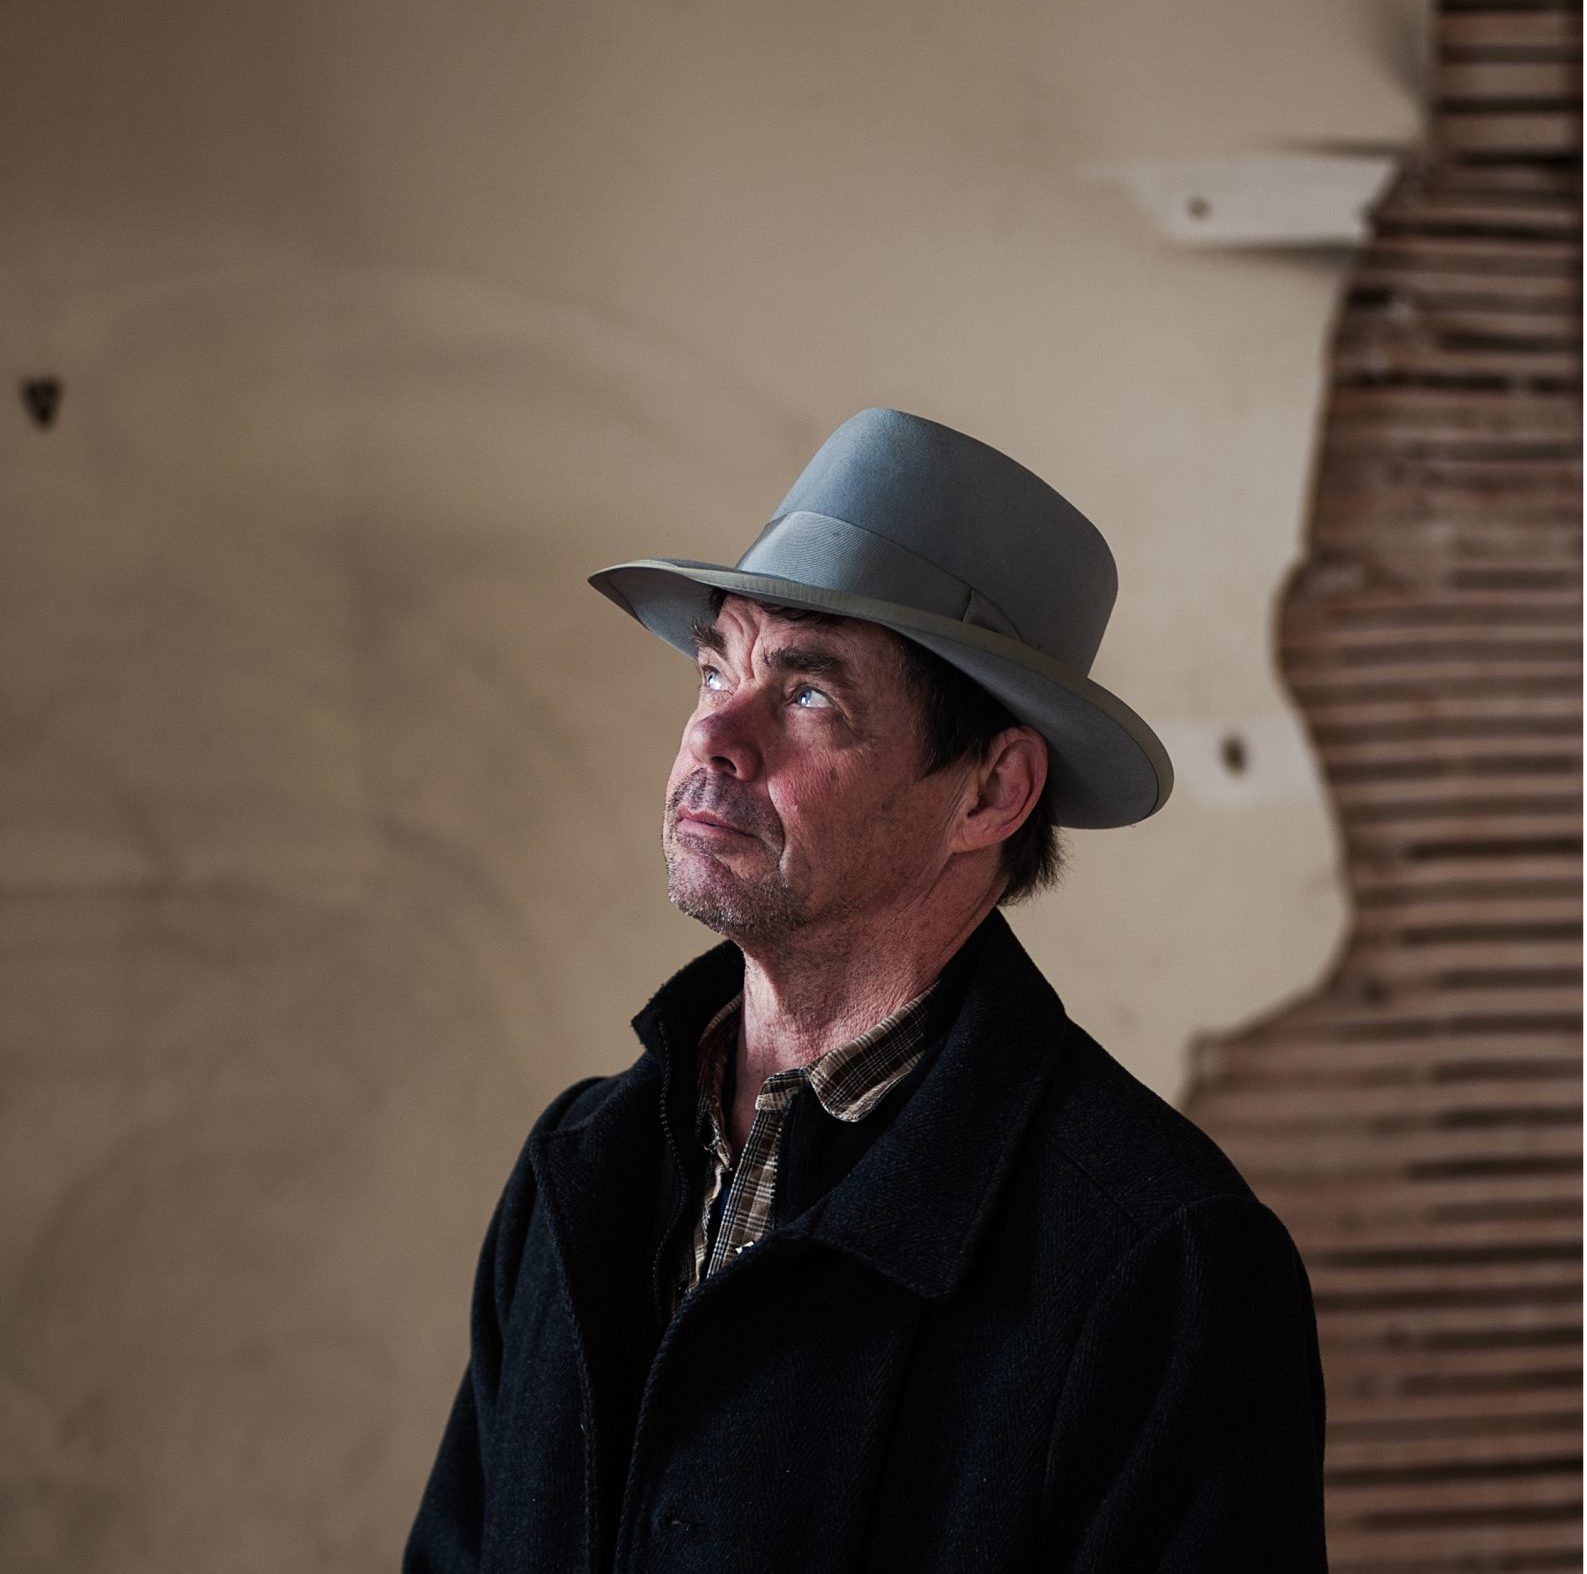 rich hall shot from cannons tour dates